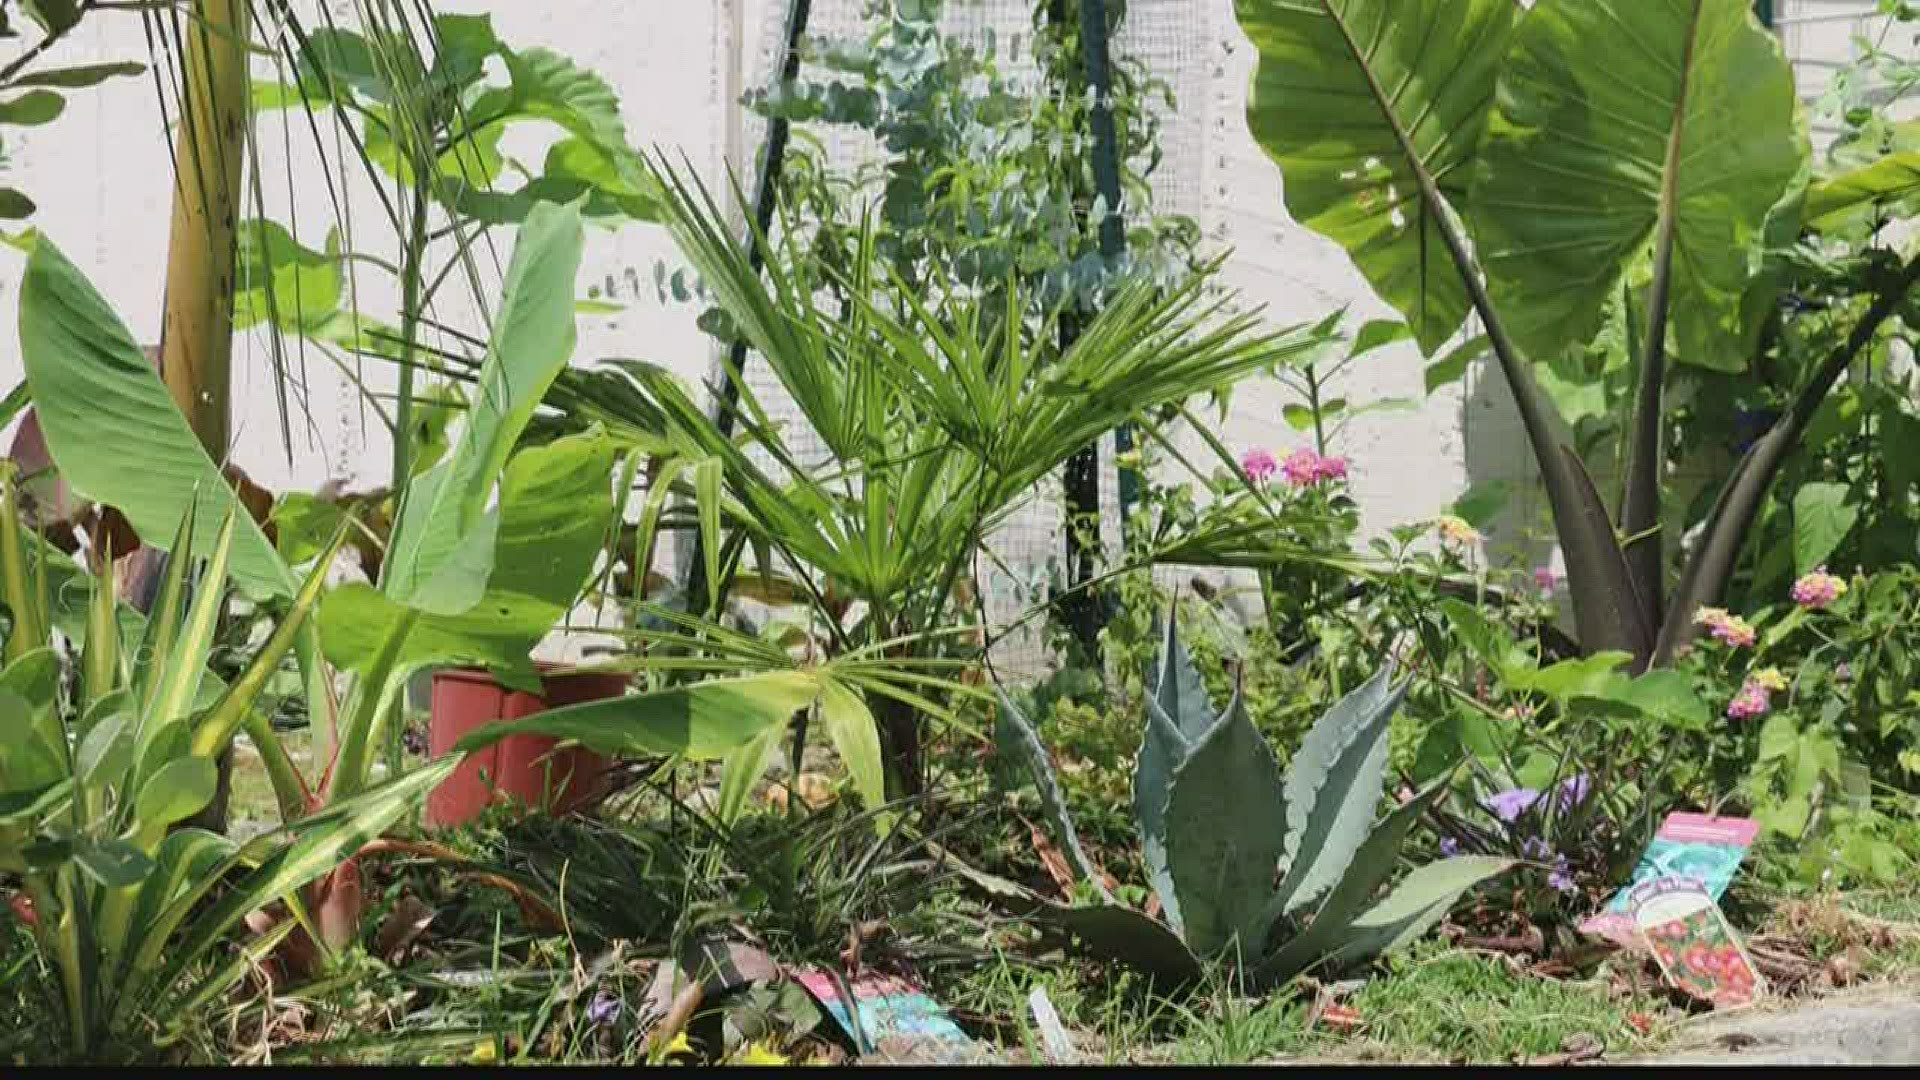 Meteorologist Alex Calamia shares plants that are beautiful and tasty to us, and totally unattractive to deer. Here’s an update on this experimental garden.